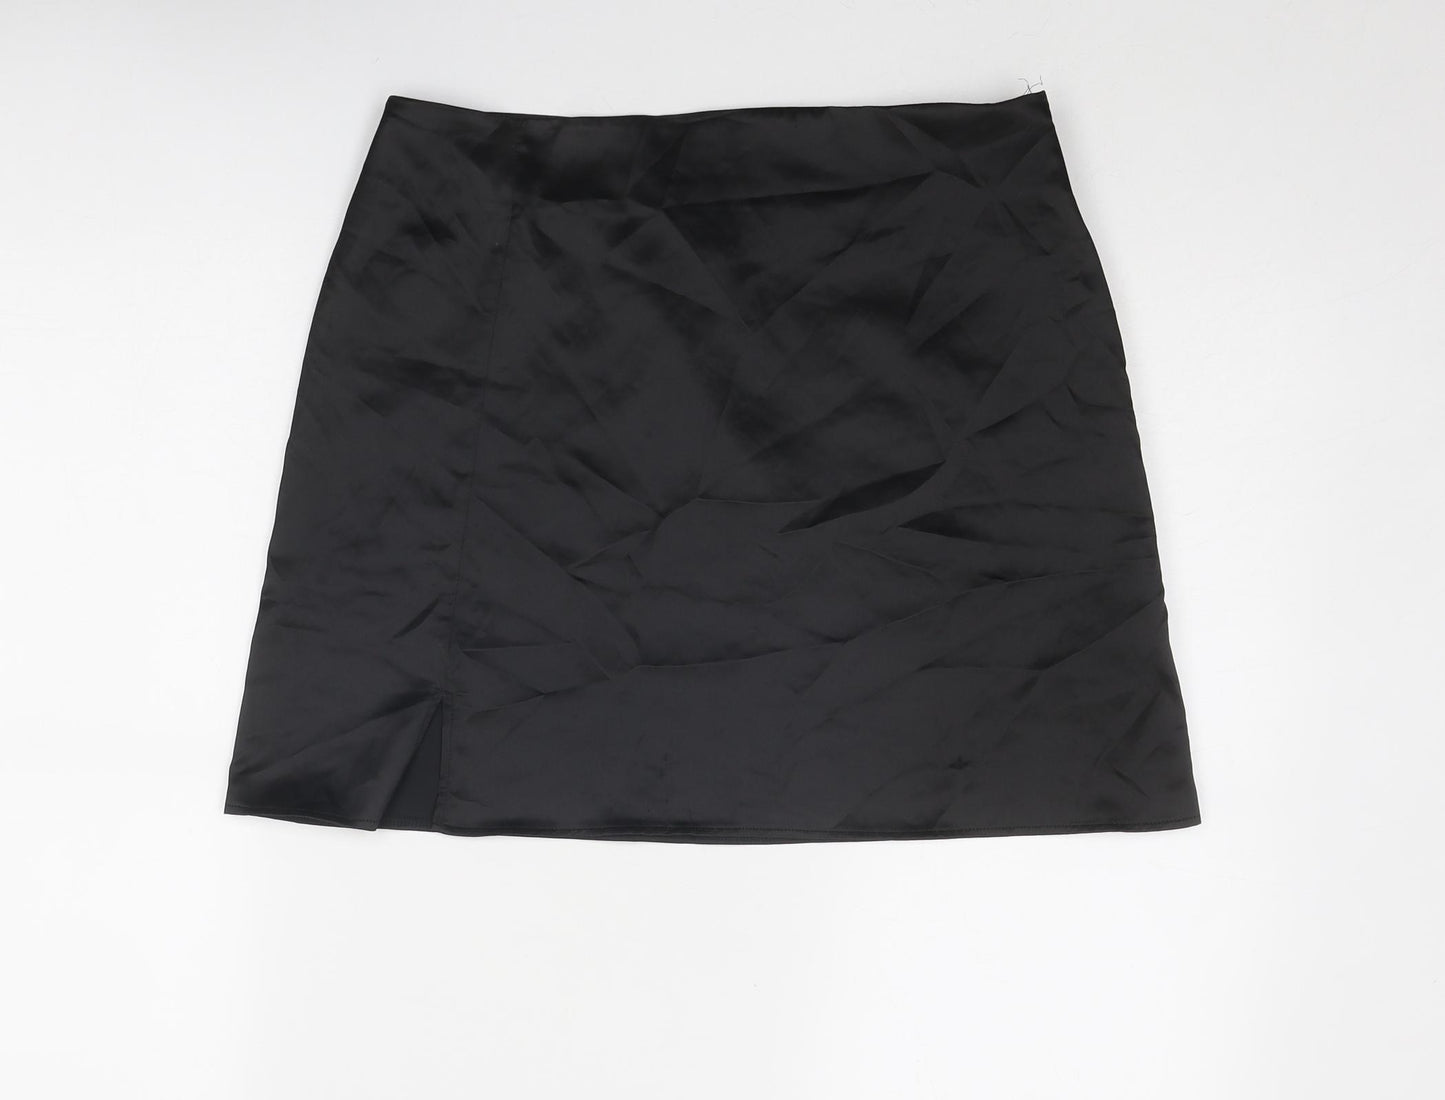 As You Womens Black Polyester A-Line Skirt Size 14 Zip